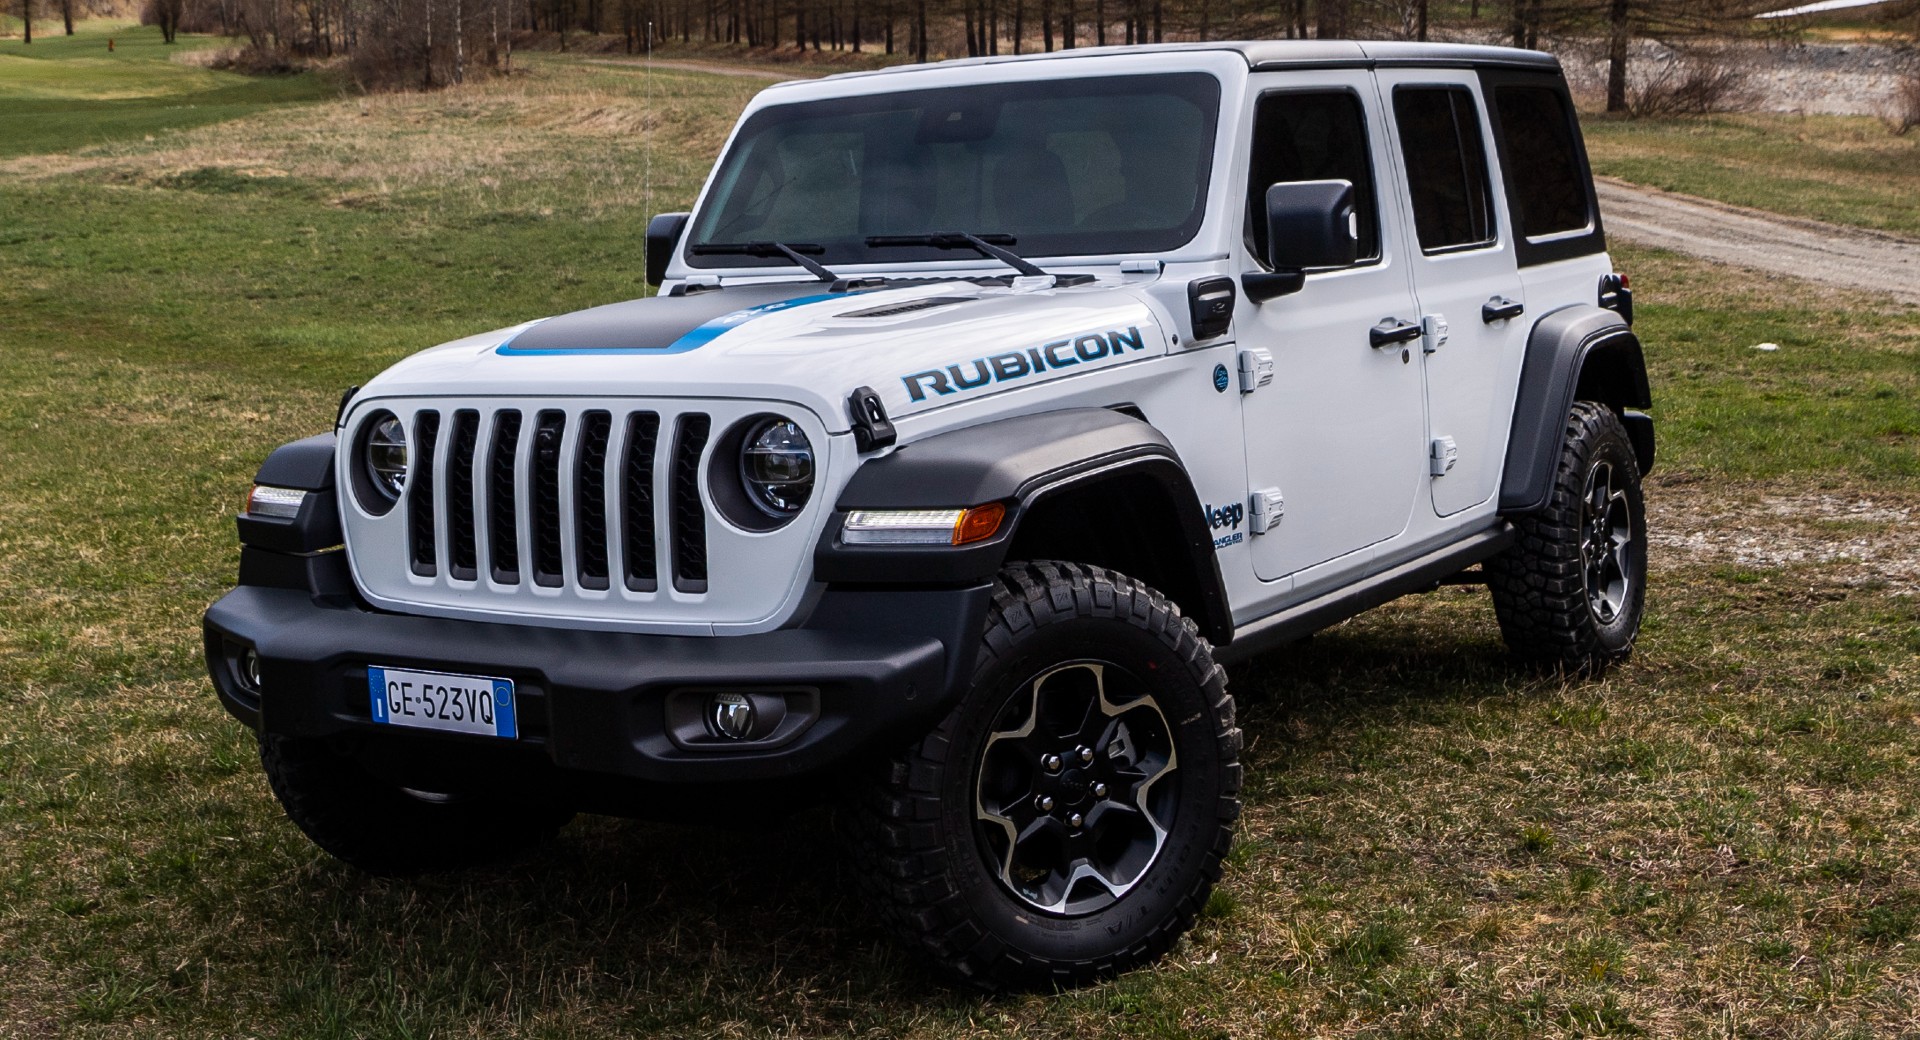 Jeep Wrangler Stays True to Its Roots New Hybrid Models Embrace Tradition While Looking to the Future----